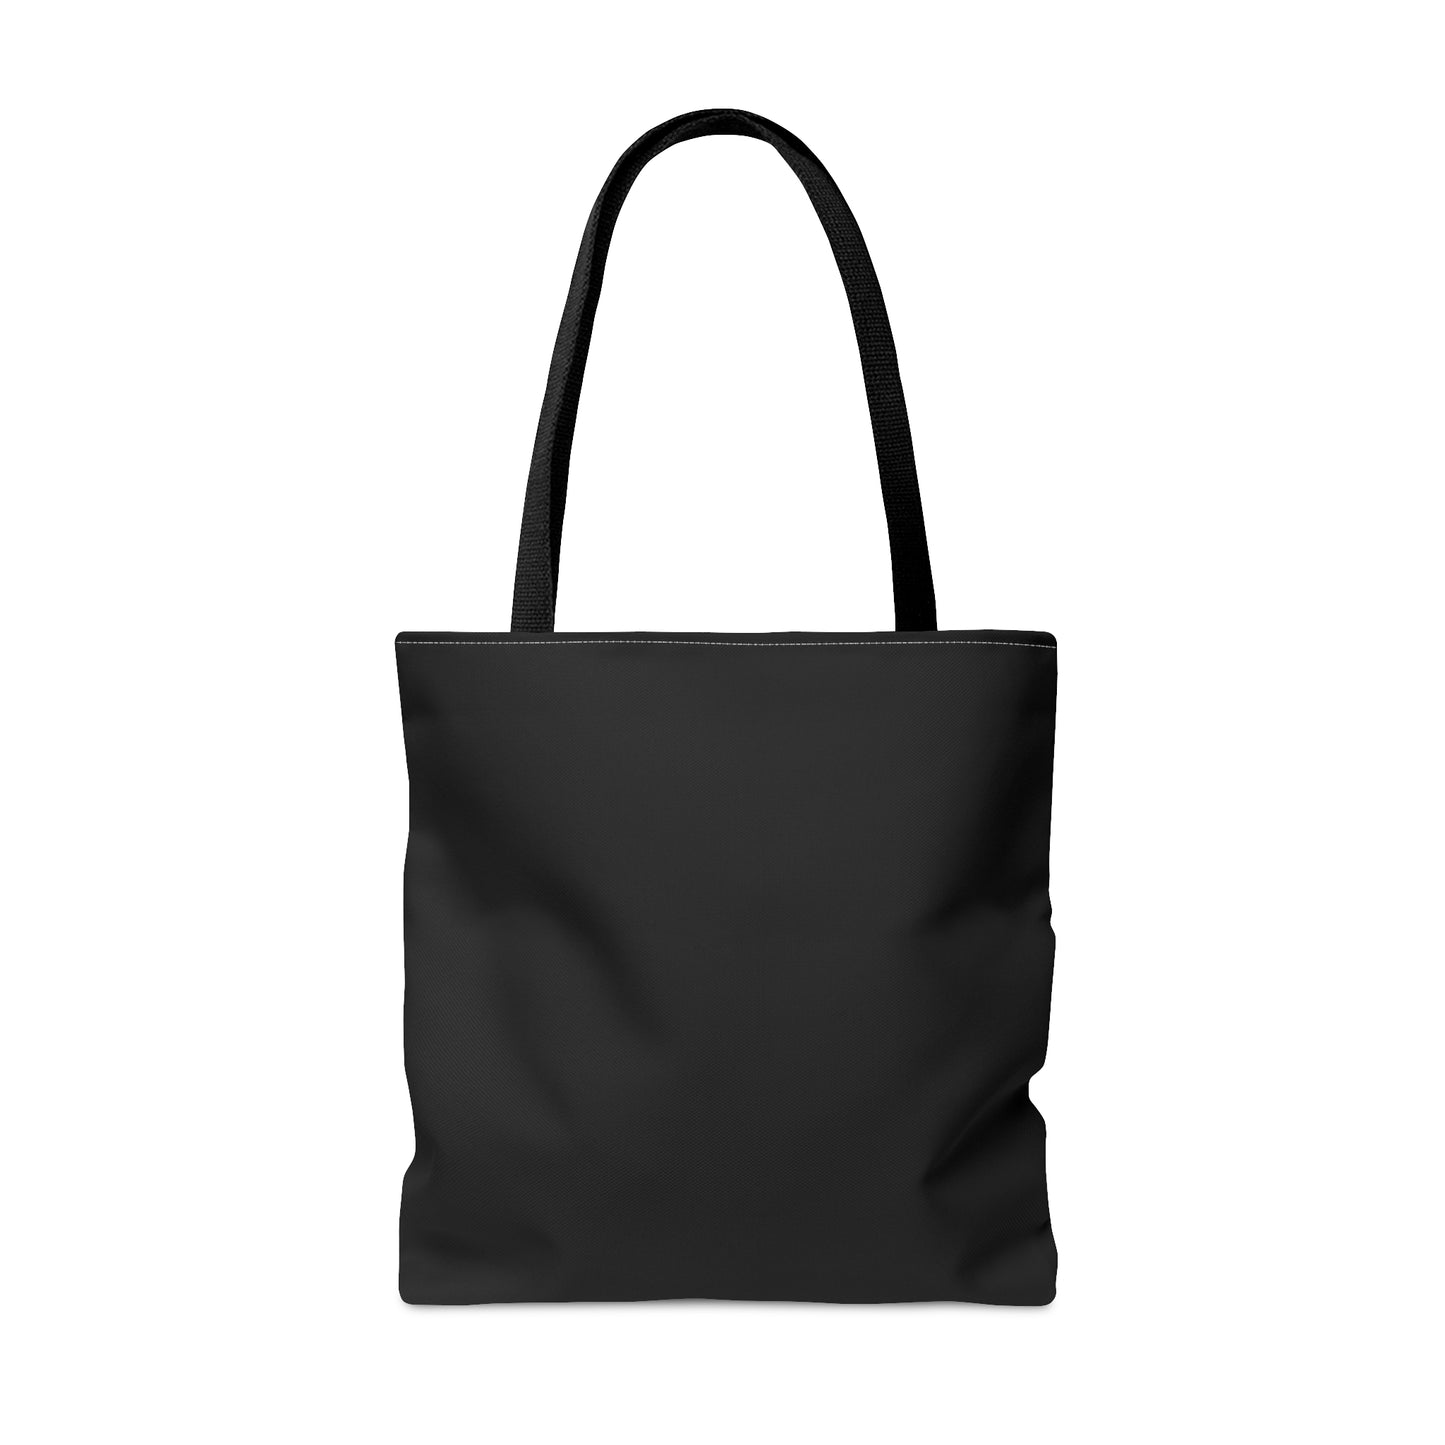 Oversized Fall Reading Vibes Tote Bag